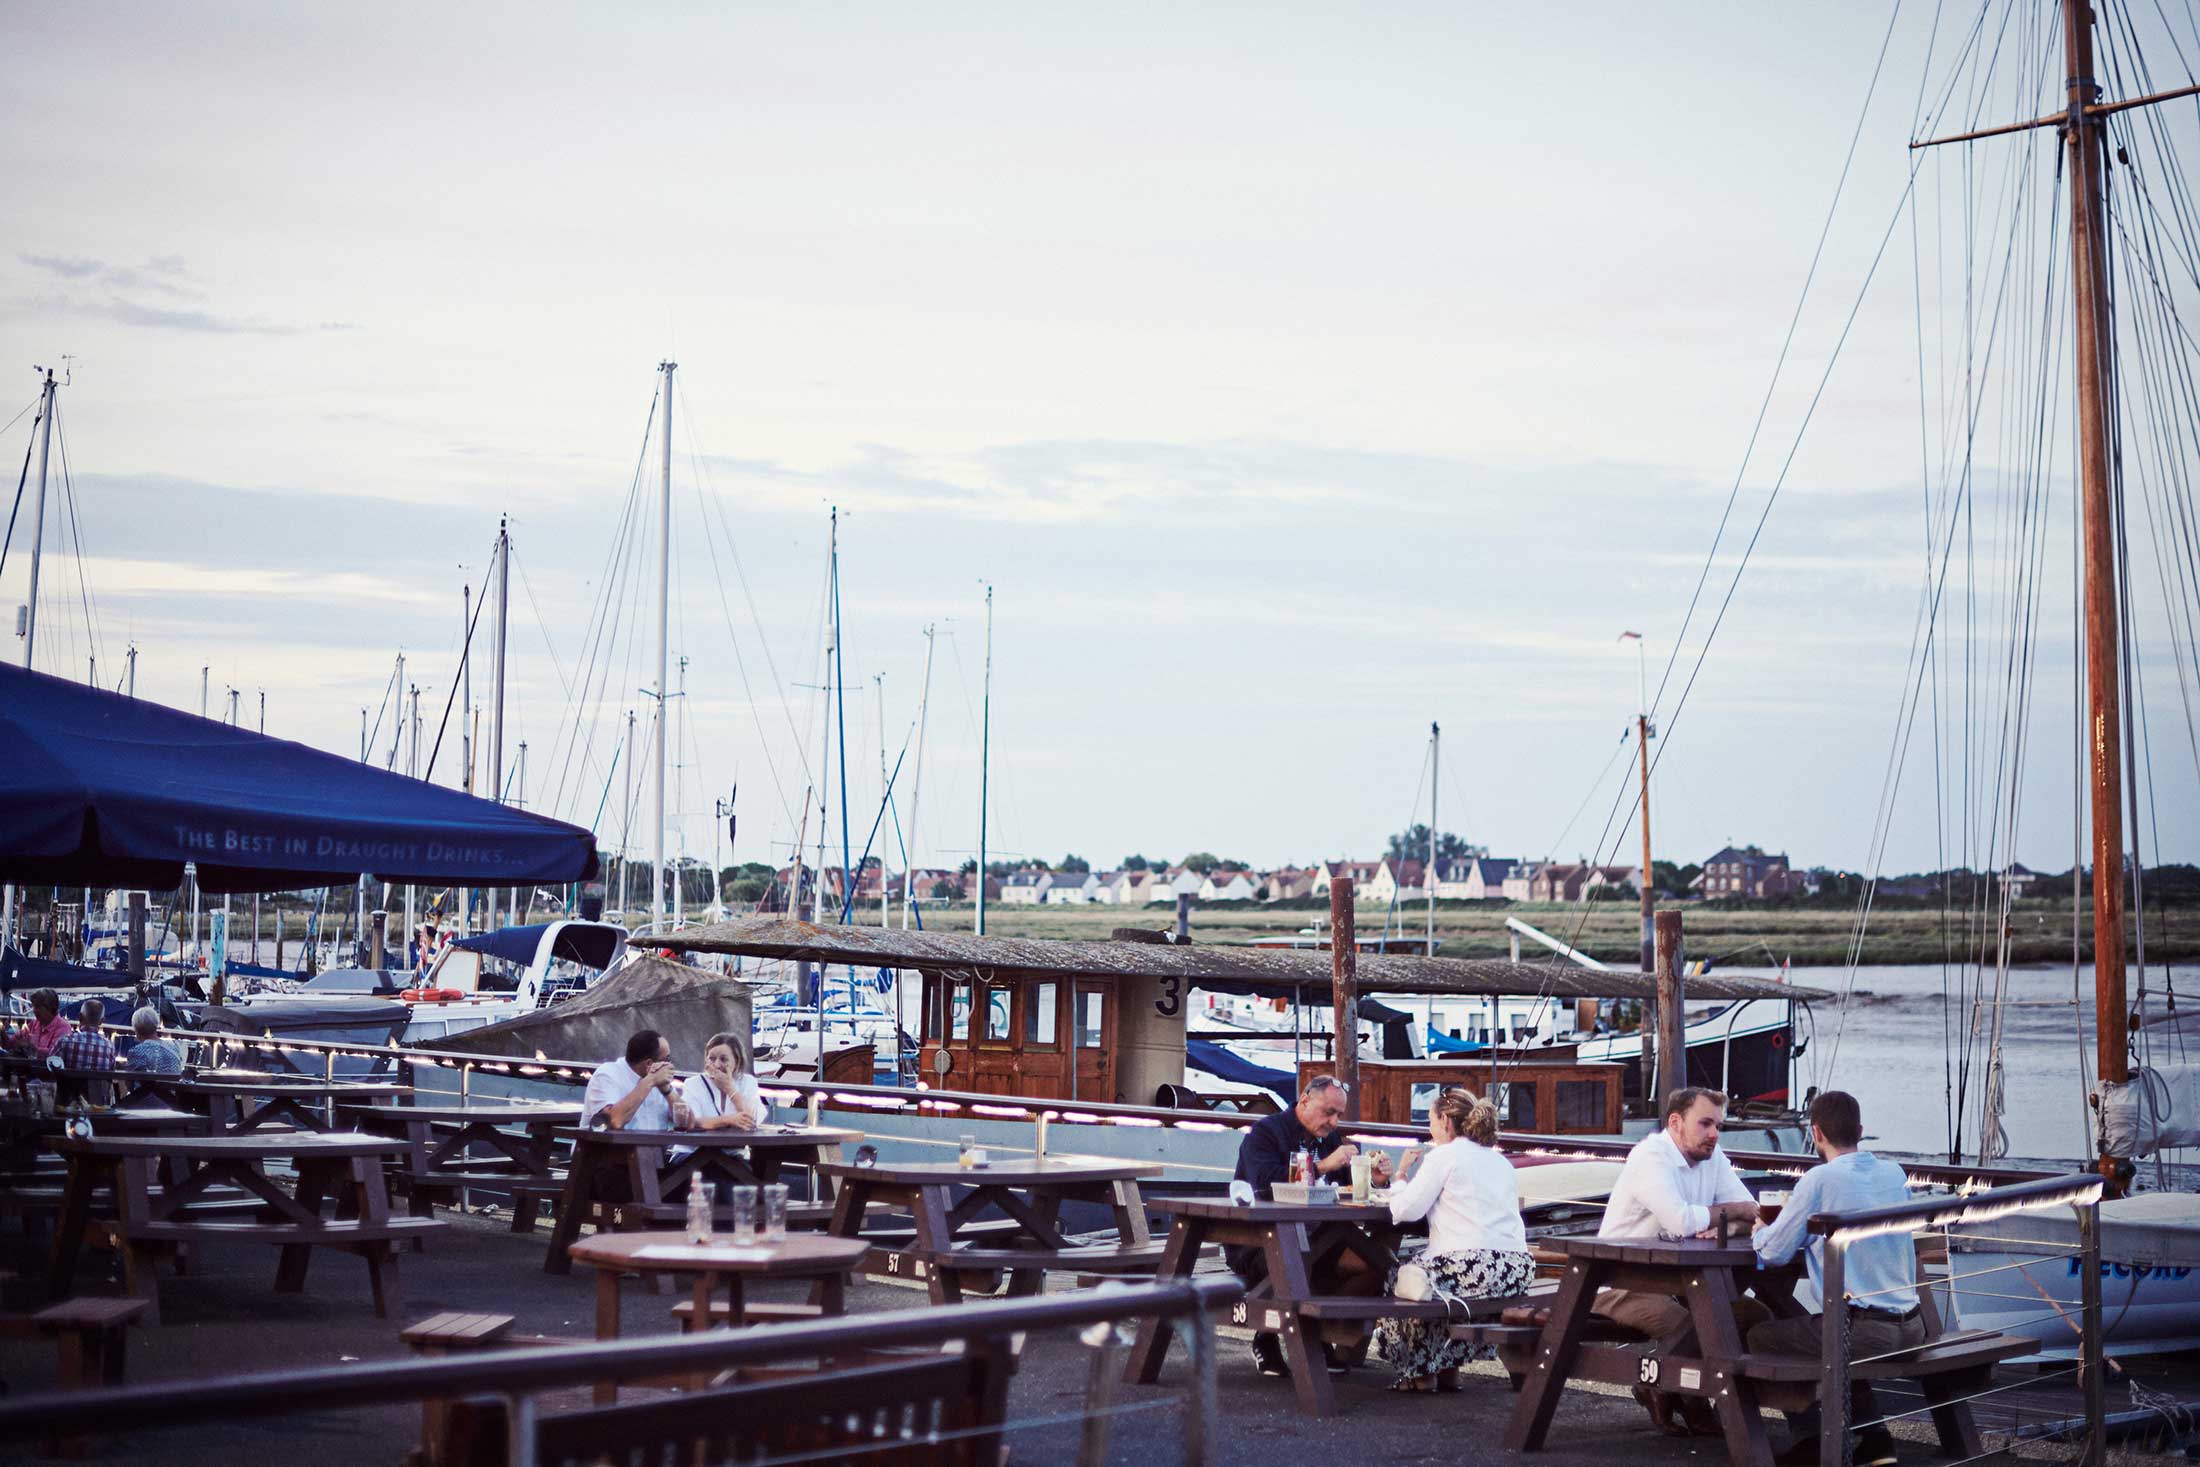 People socialising on town quay - Chelmsford - Beresfords Estate agents - Essex